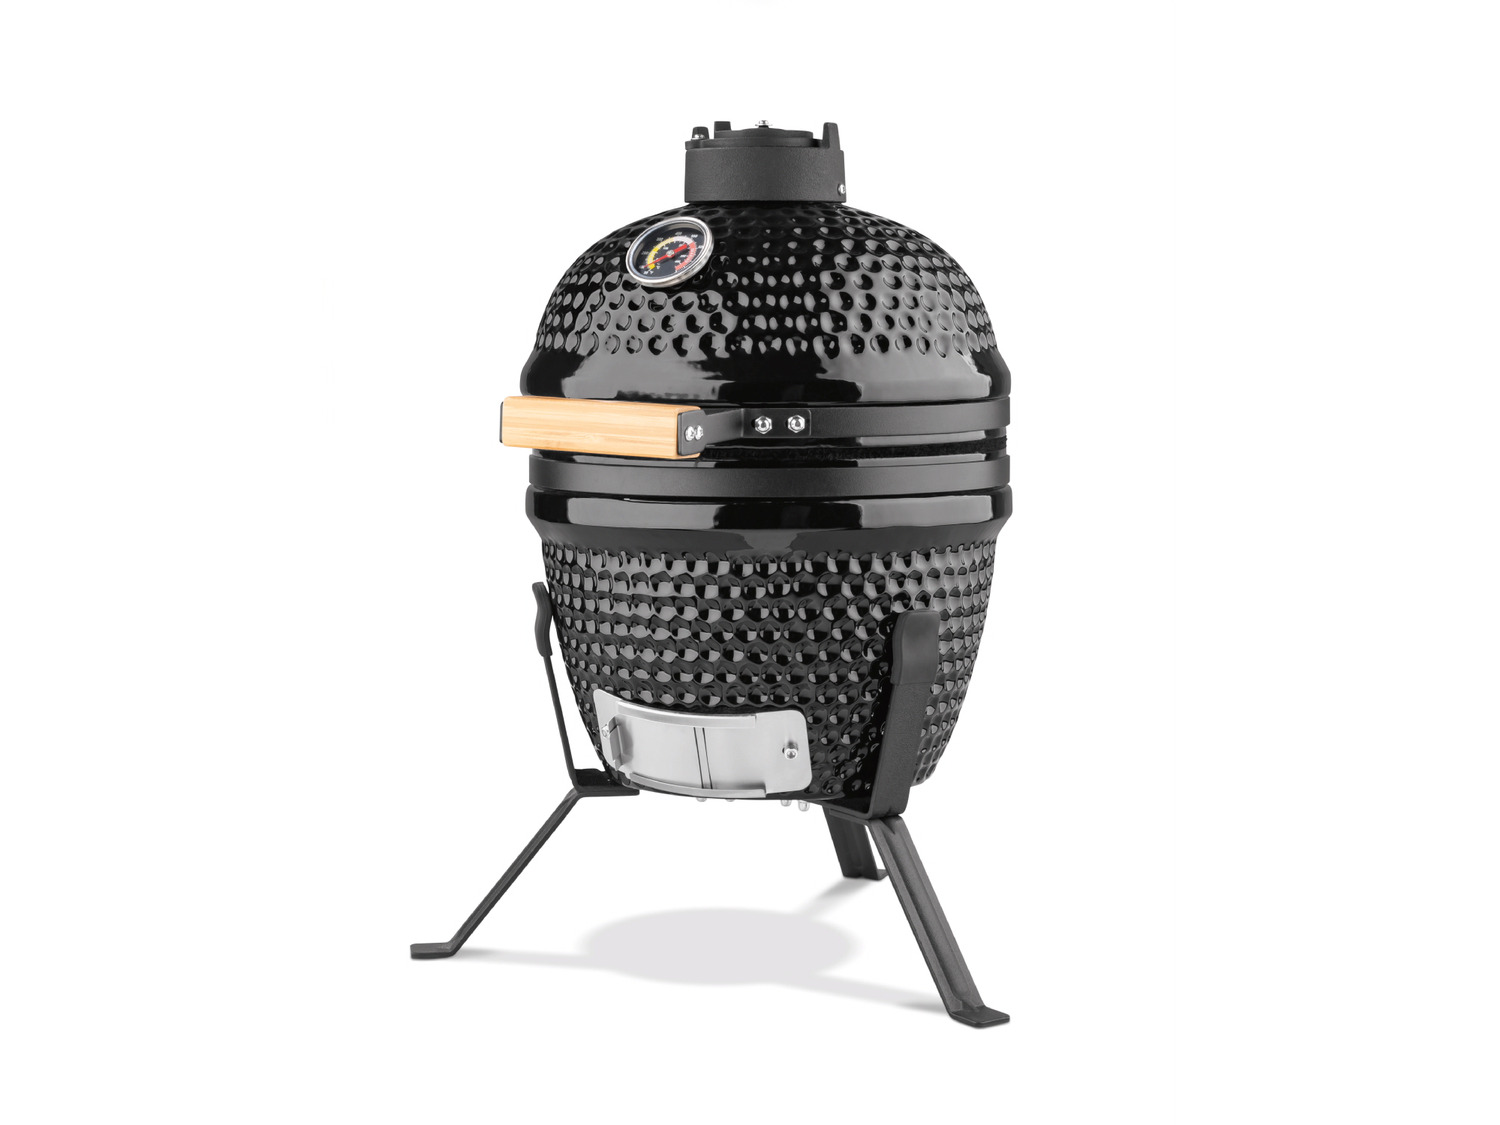 GRILLMEISTER Grill Egg keramische barbecue |